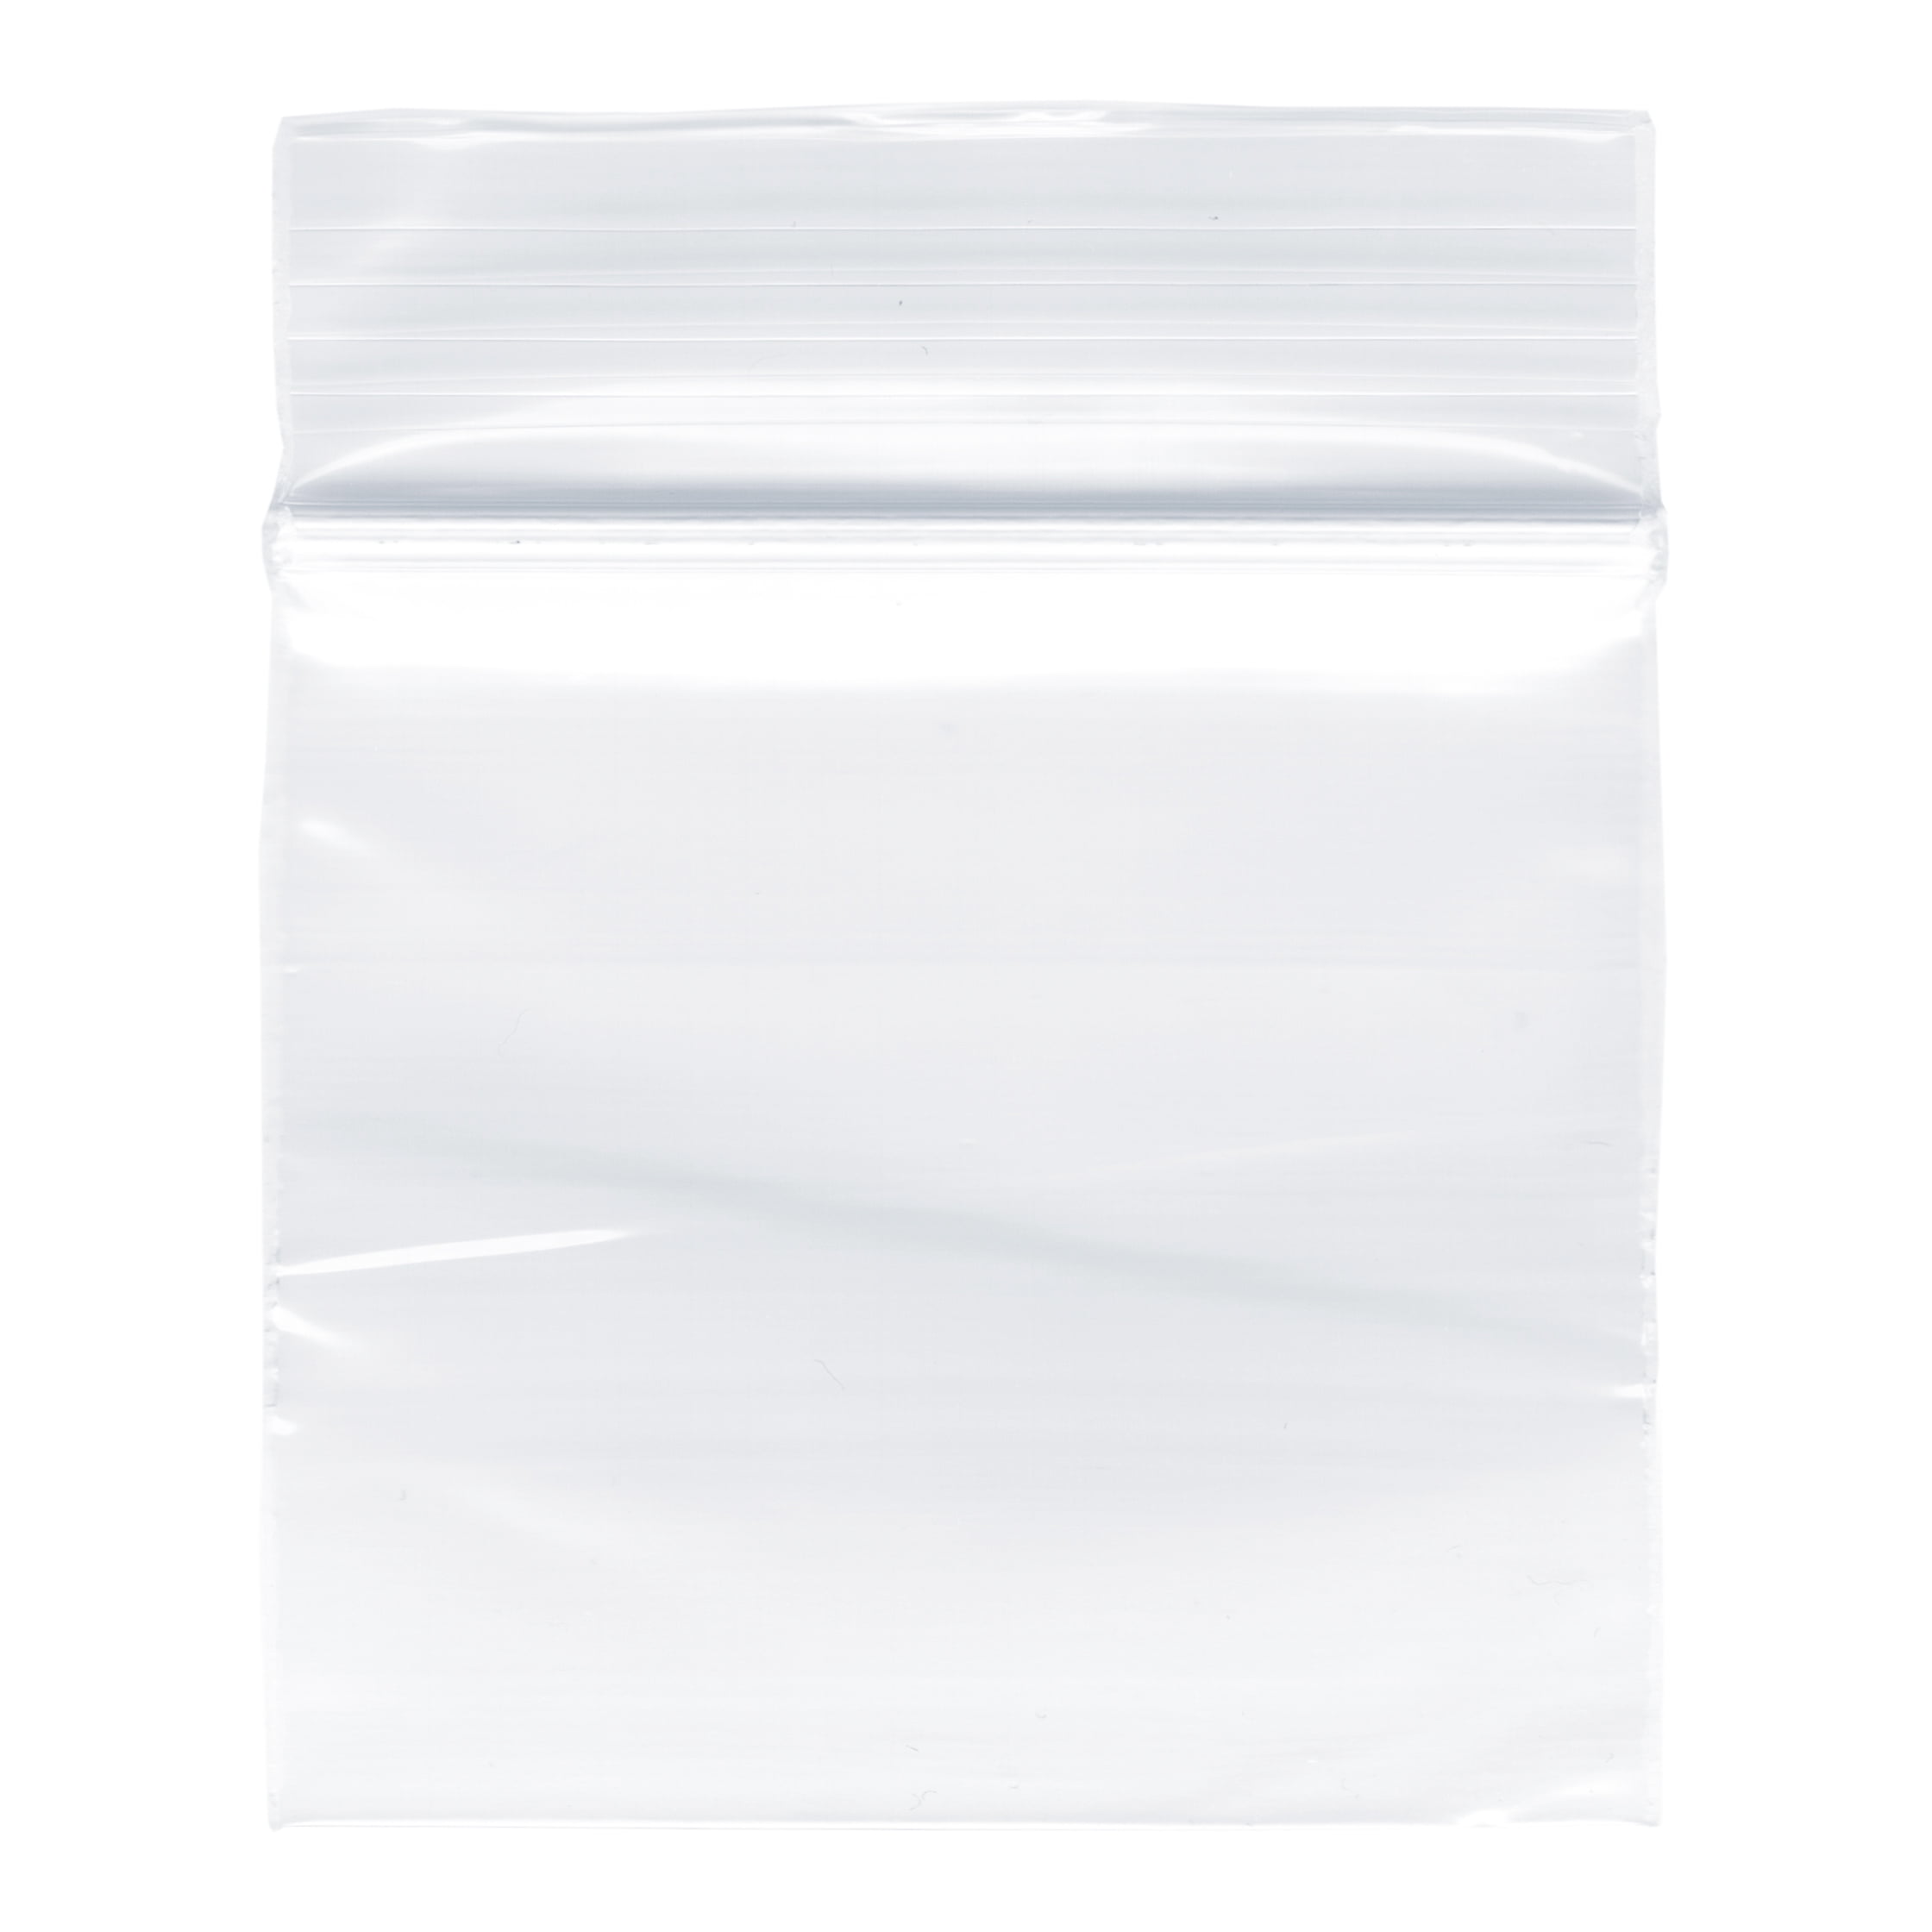 Reclosable 2x2 inch Plastic Zippy Bags White Block 100 count FREE SHIPPING 